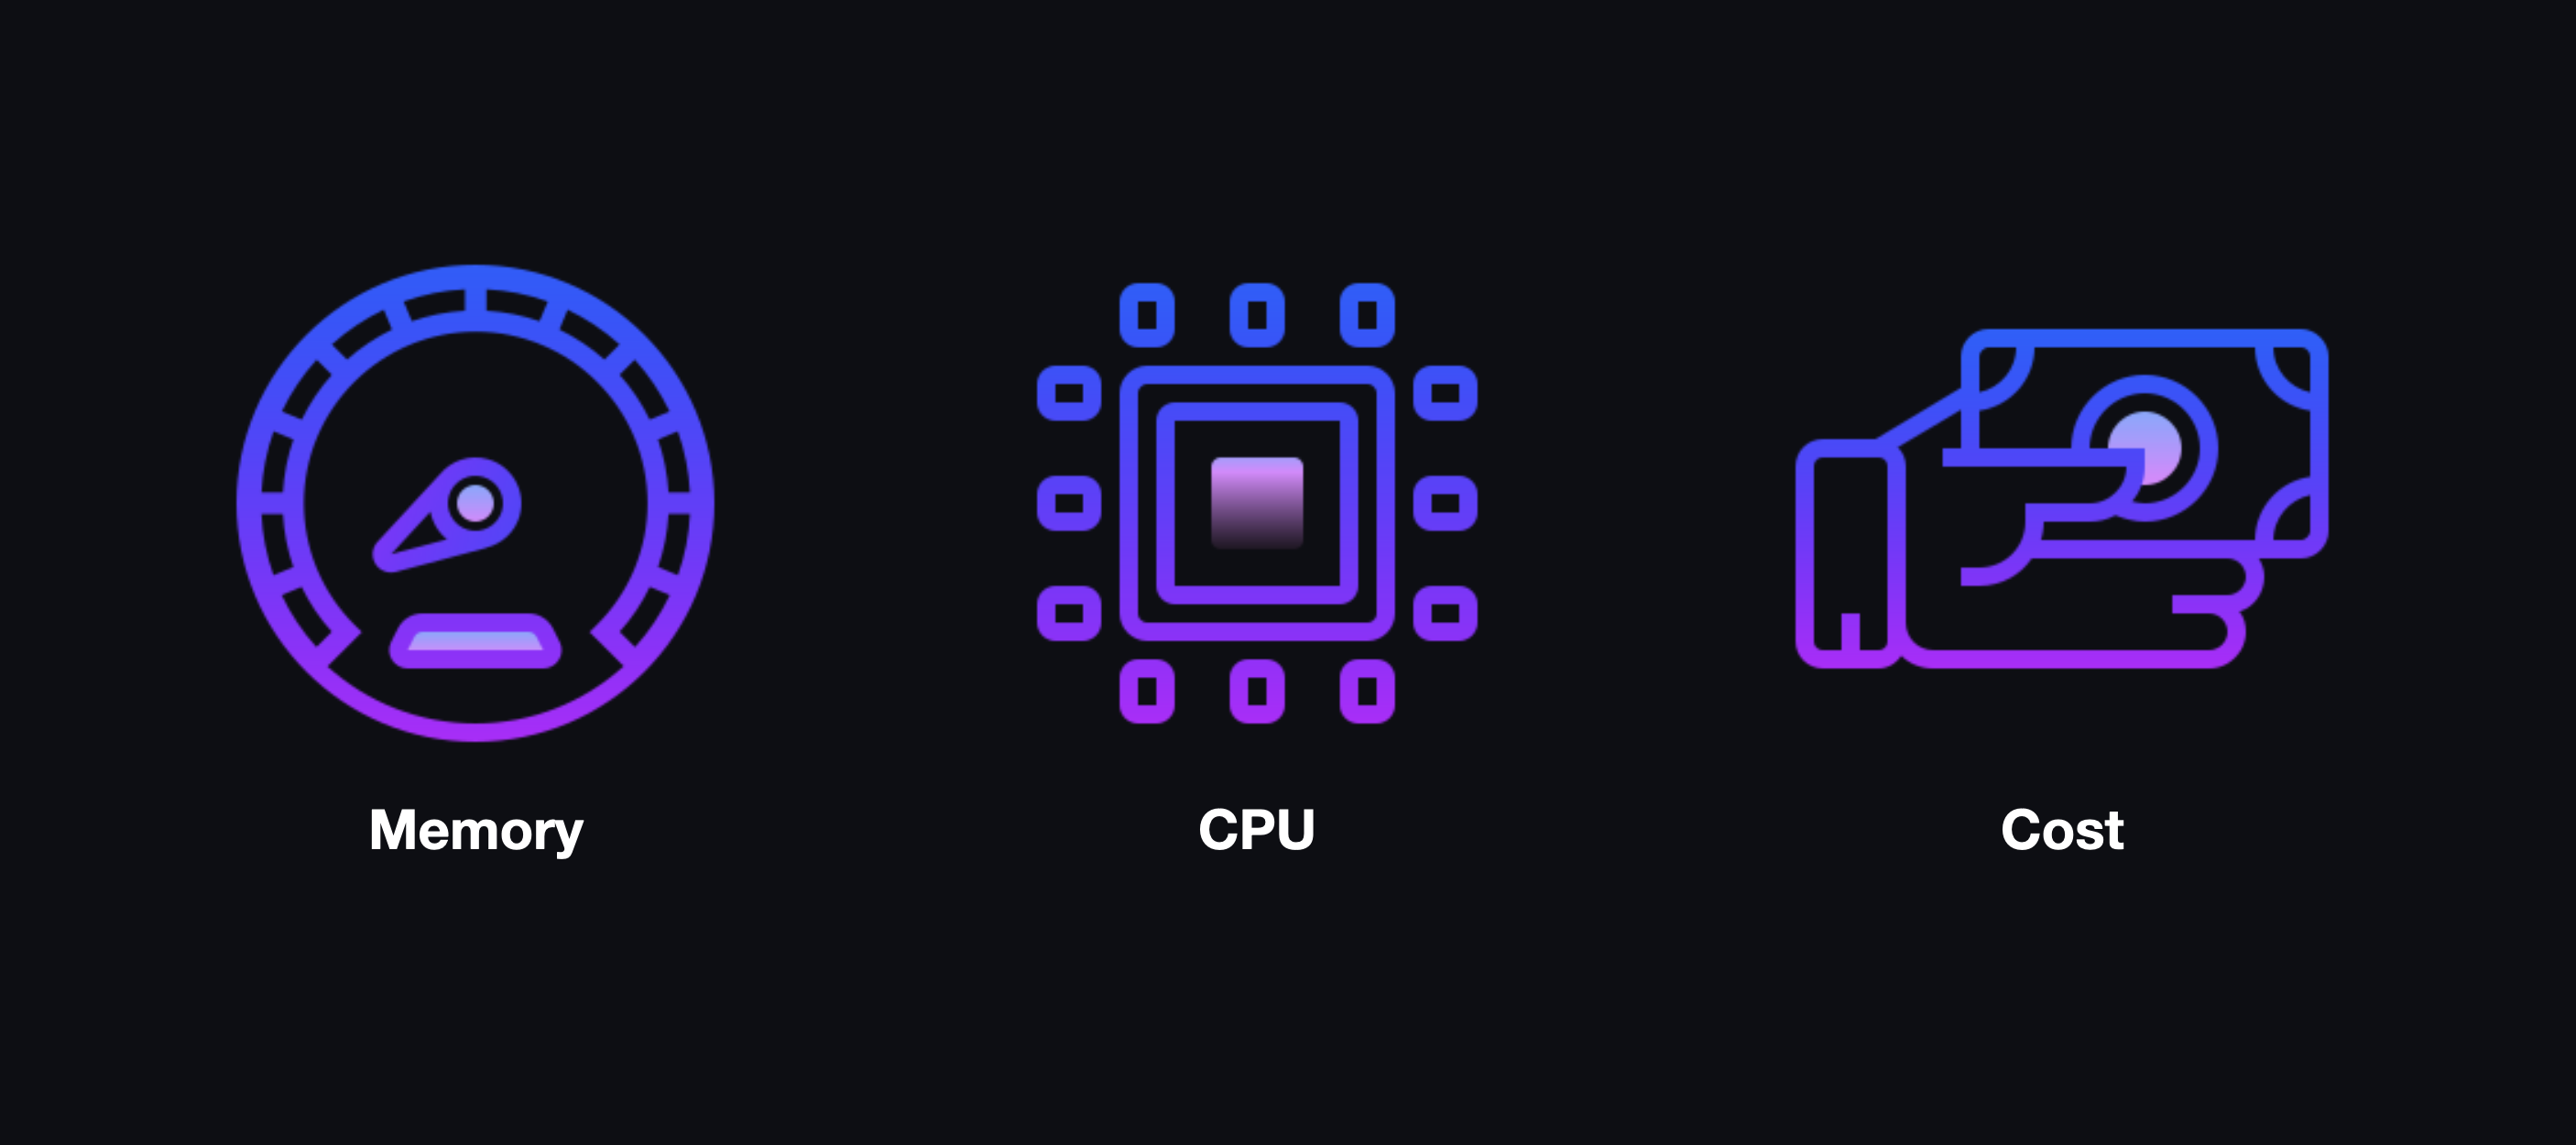 Three icons representing memory, CPU, and cost.